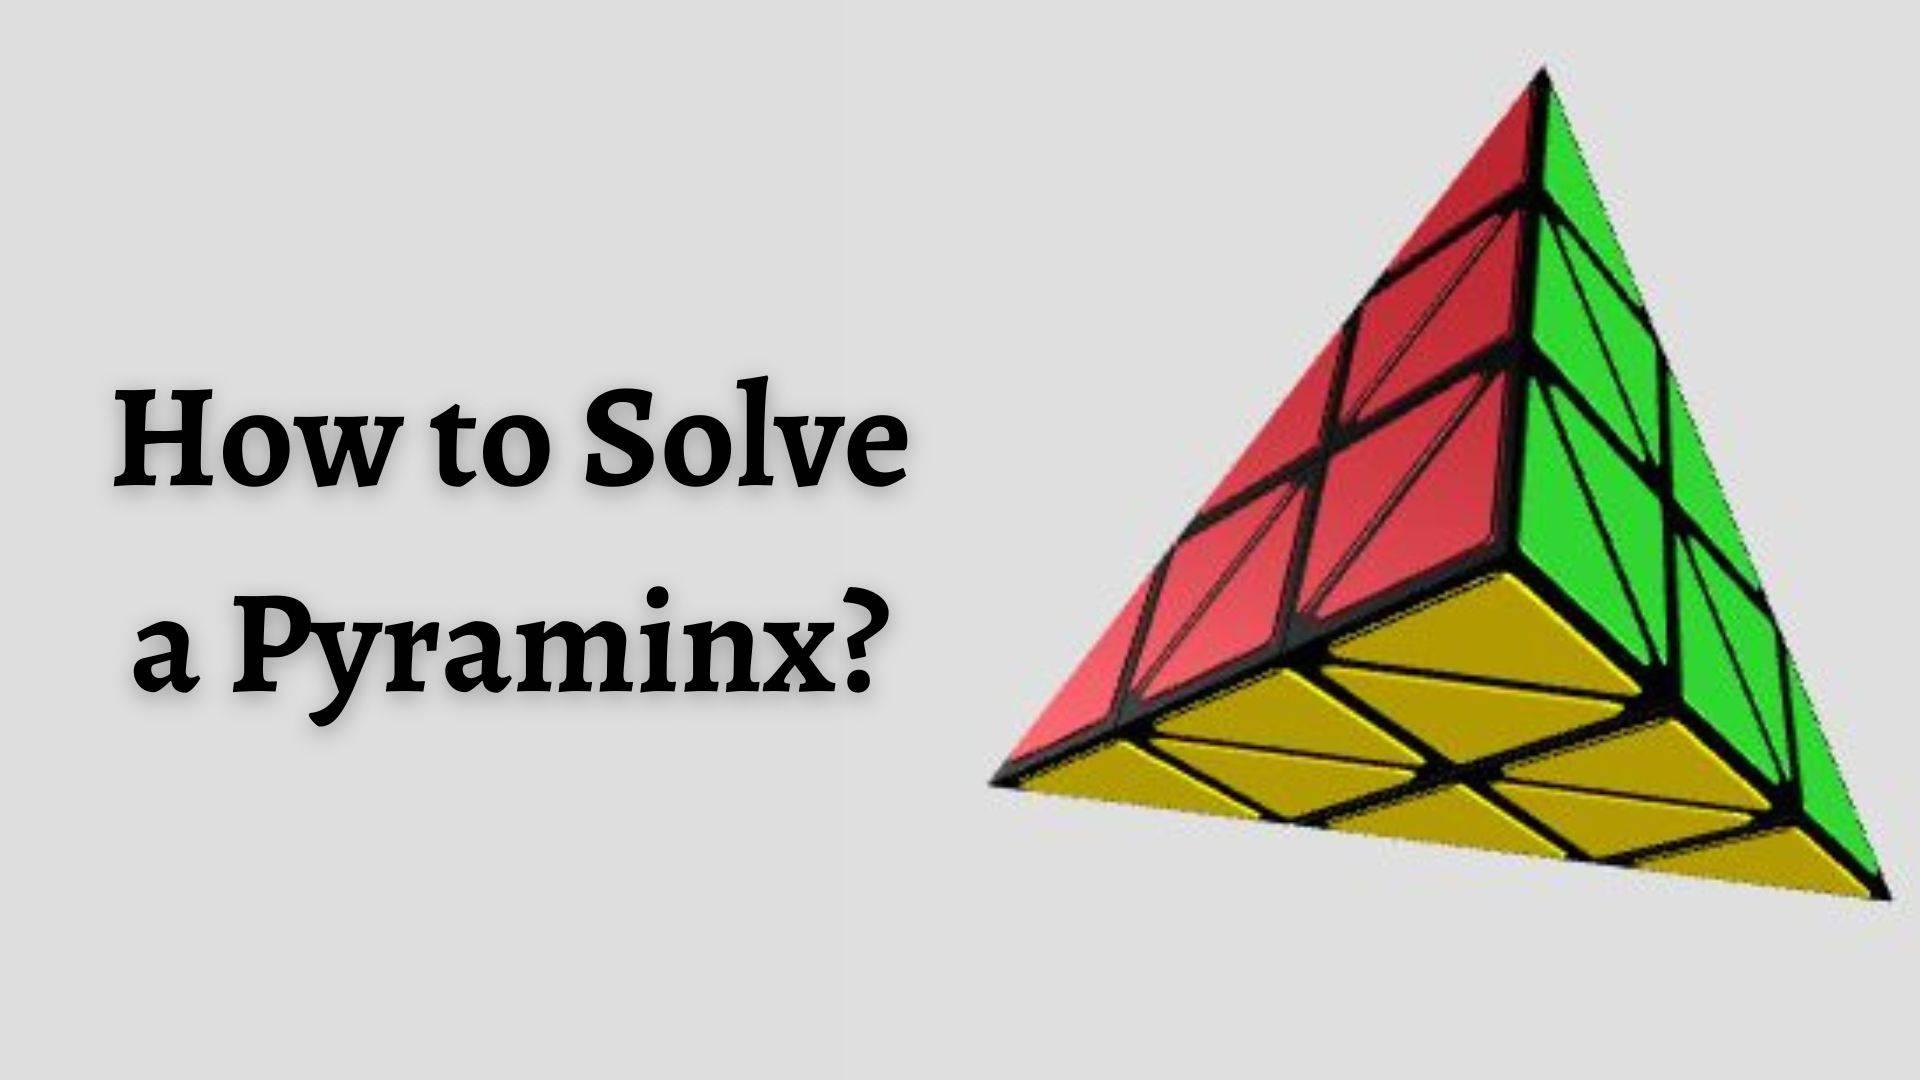 How to Solve a Pyraminx?